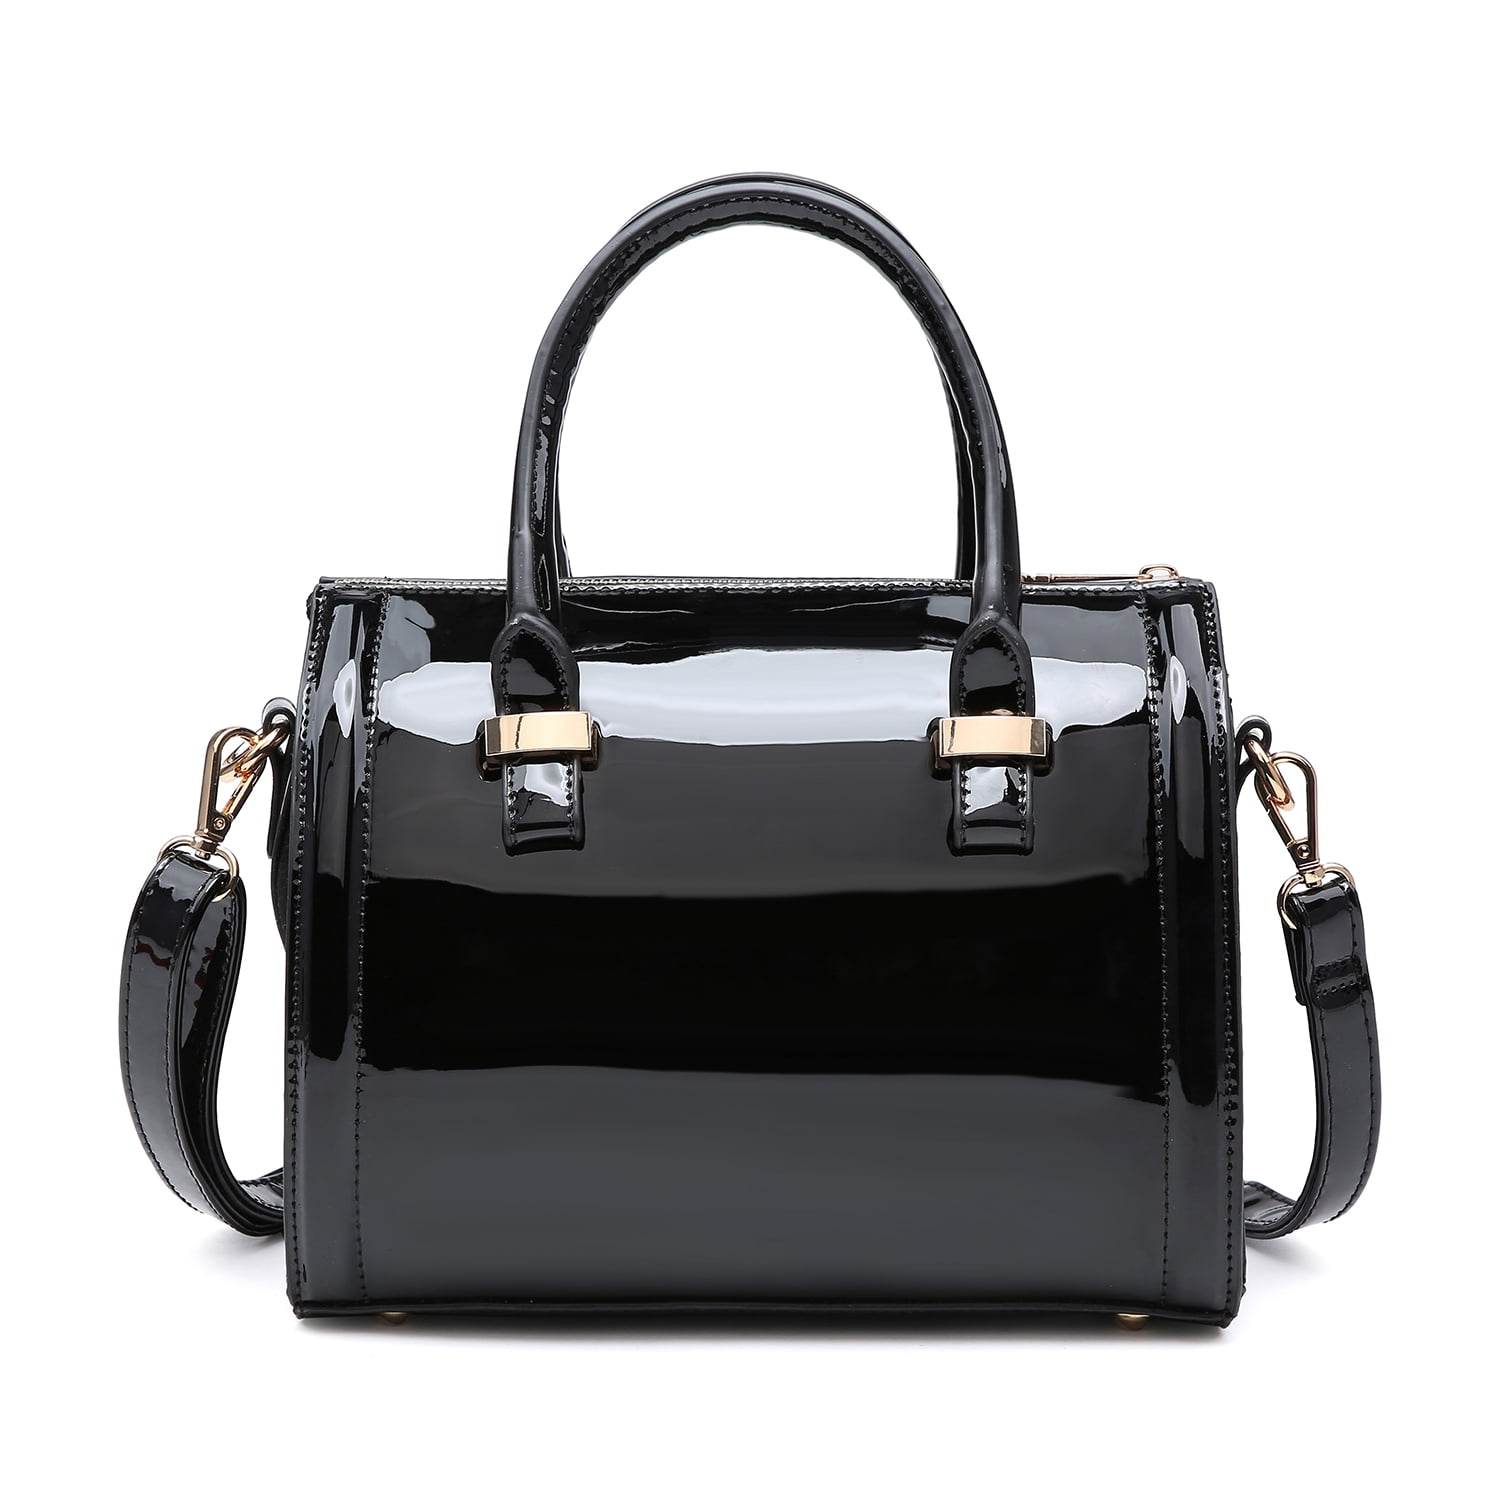 Small Mayfair Purse in Black Patent Croc | Aspinal of London